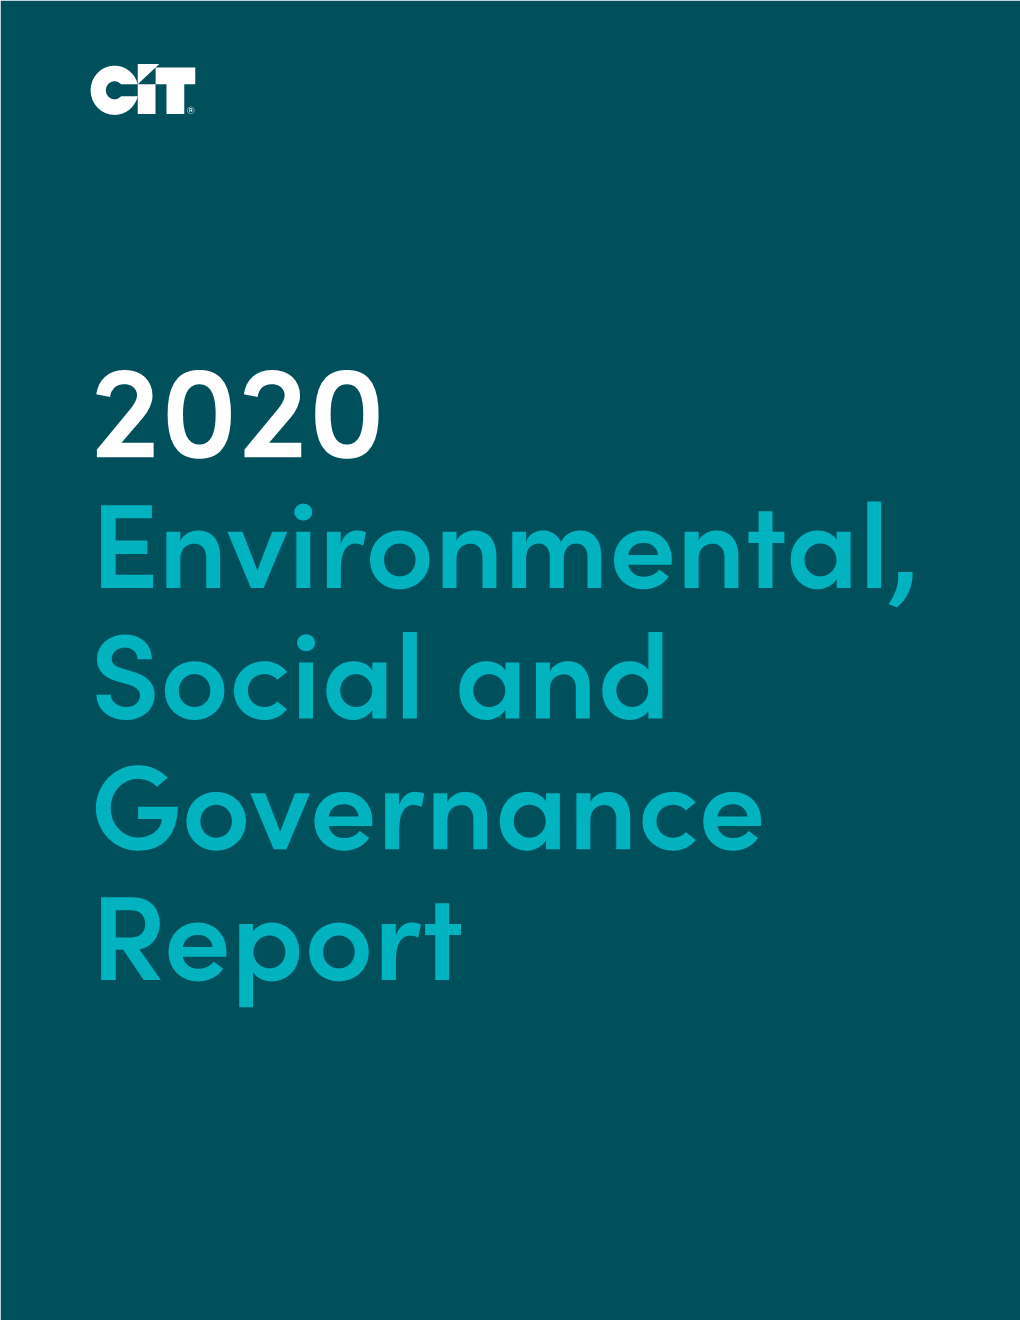 ESG Financing 22 Climate Change 24 Appendix 26 About This Report 31 Section - Introduction